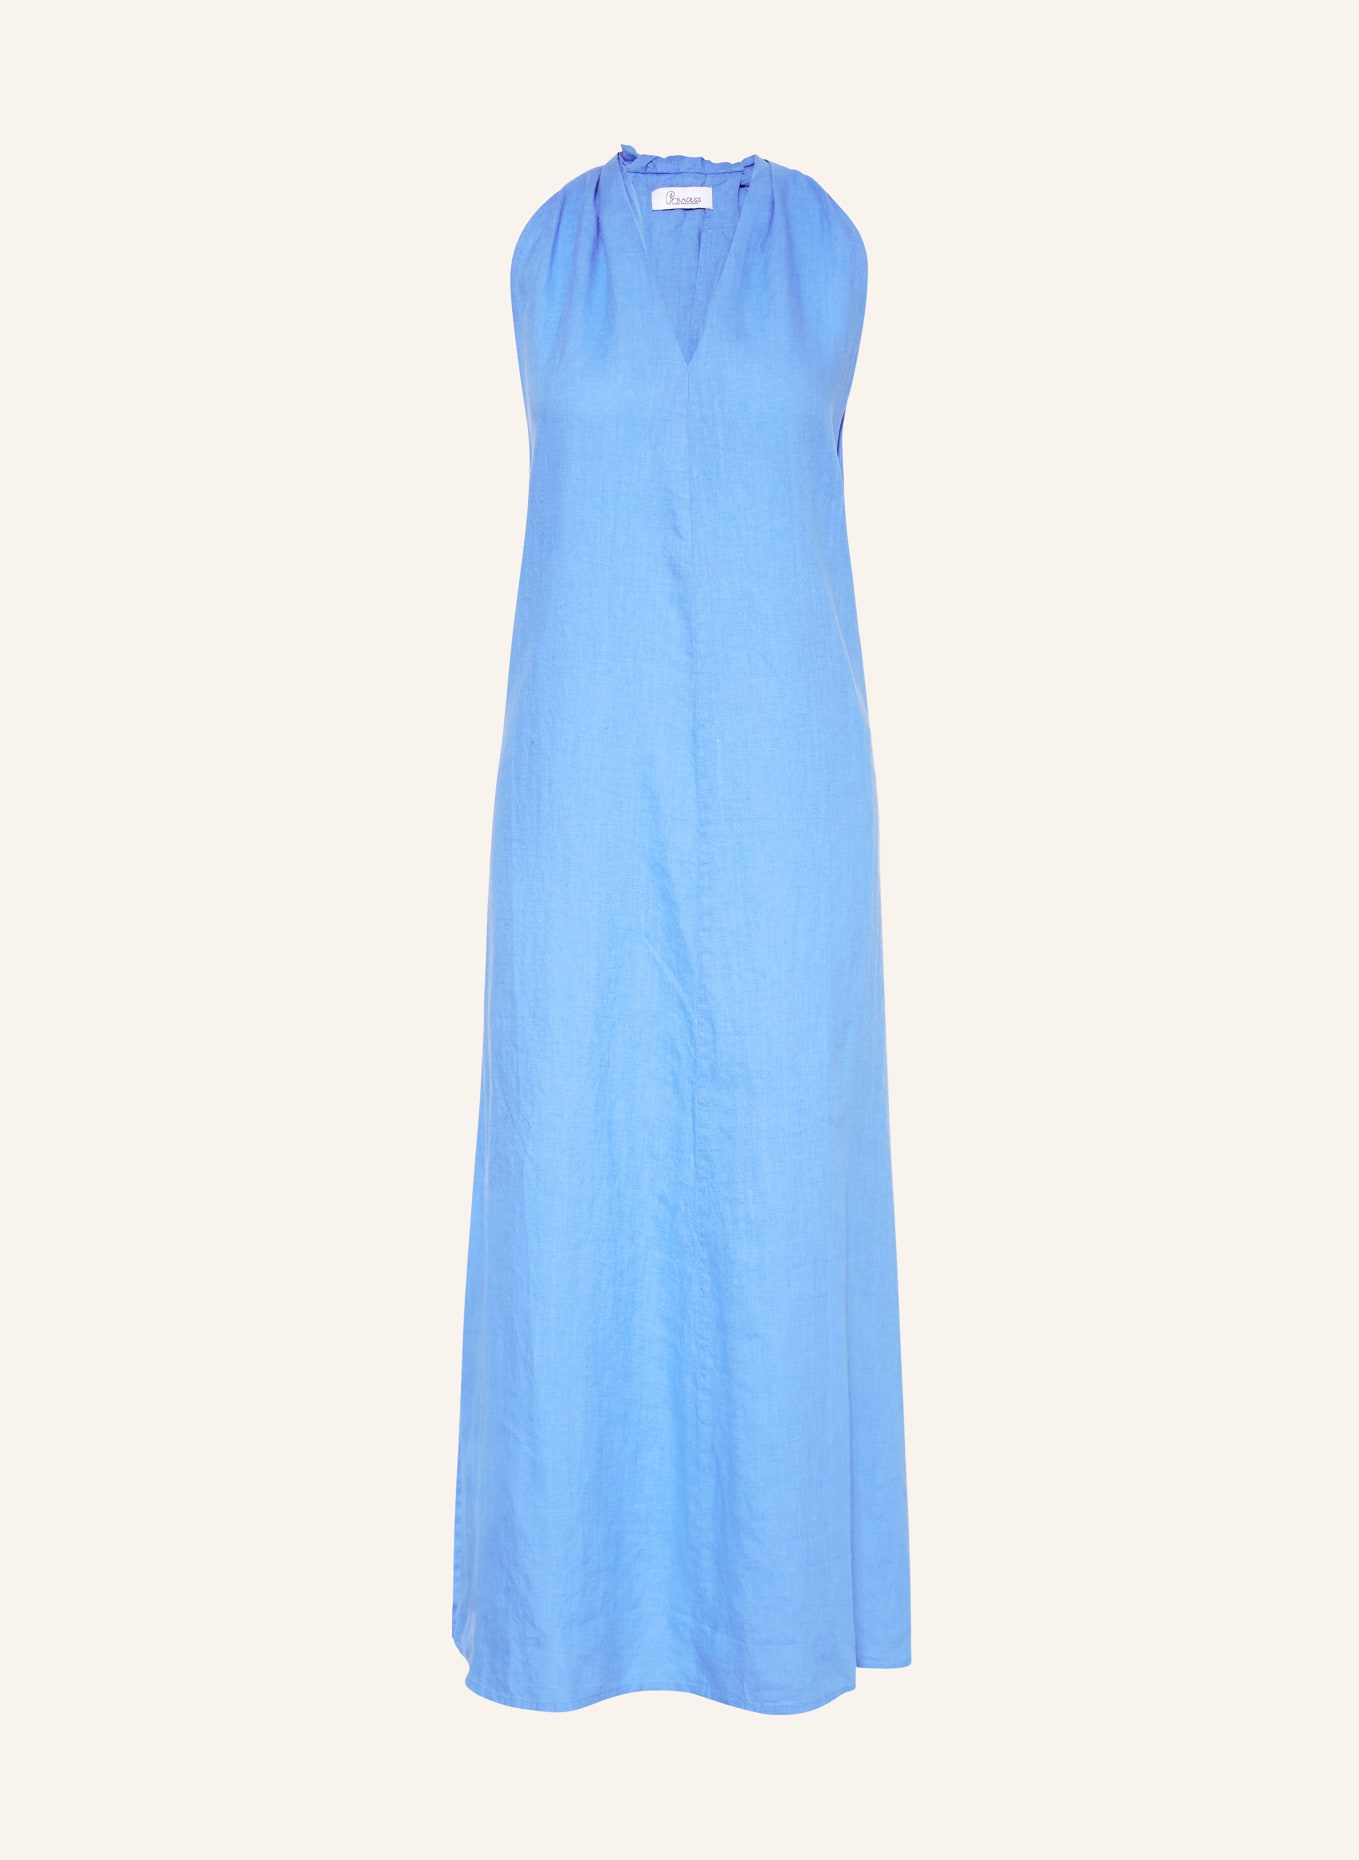 Princess GOES HOLLYWOOD Linen dress with cut-out, Color: BLUE (Image 1)